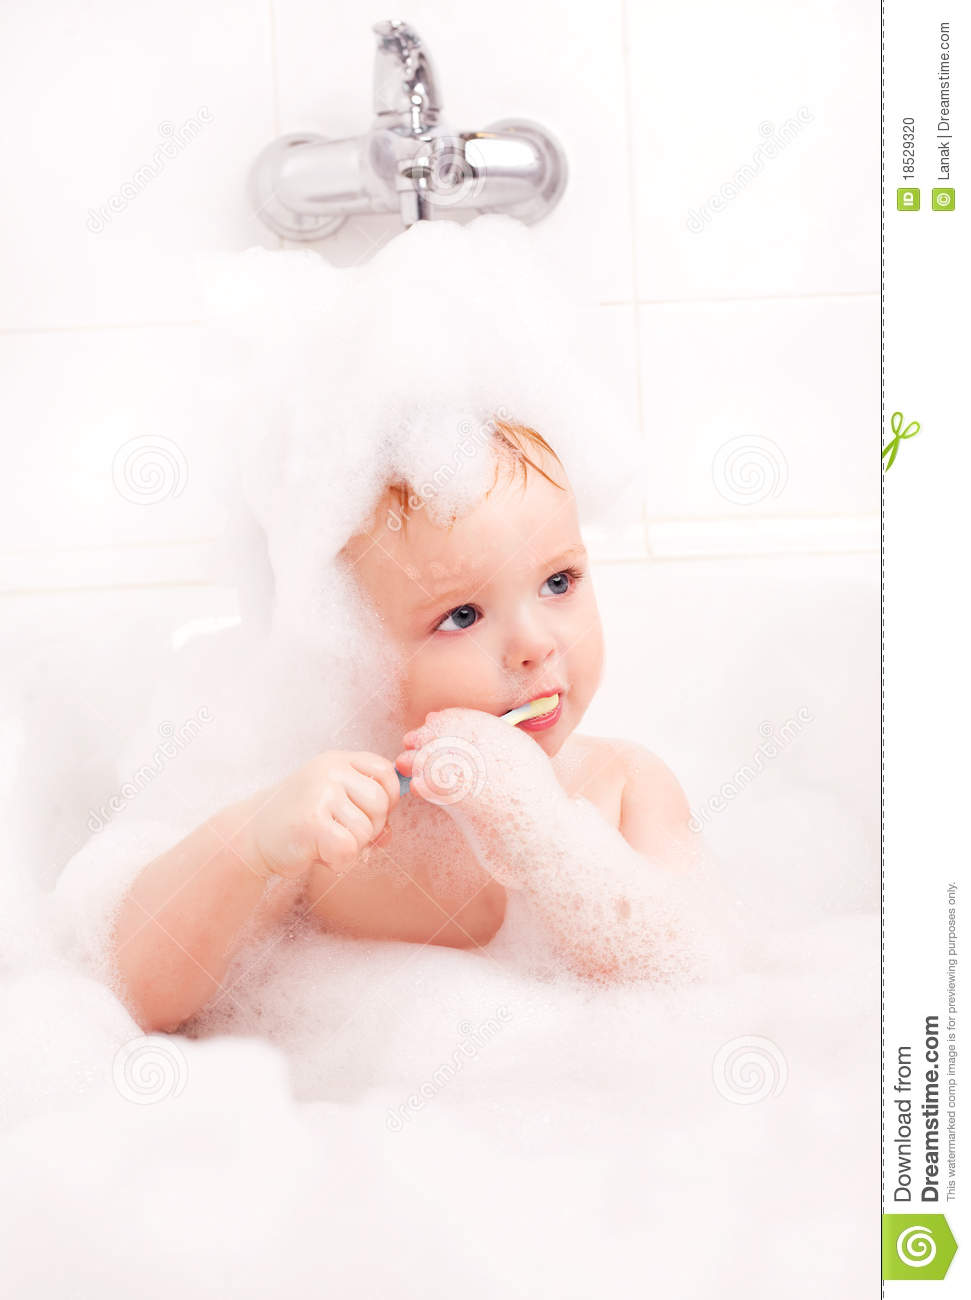 Cute One Year Old Baby Taking A Bath With Foam And Brushing Teeth 